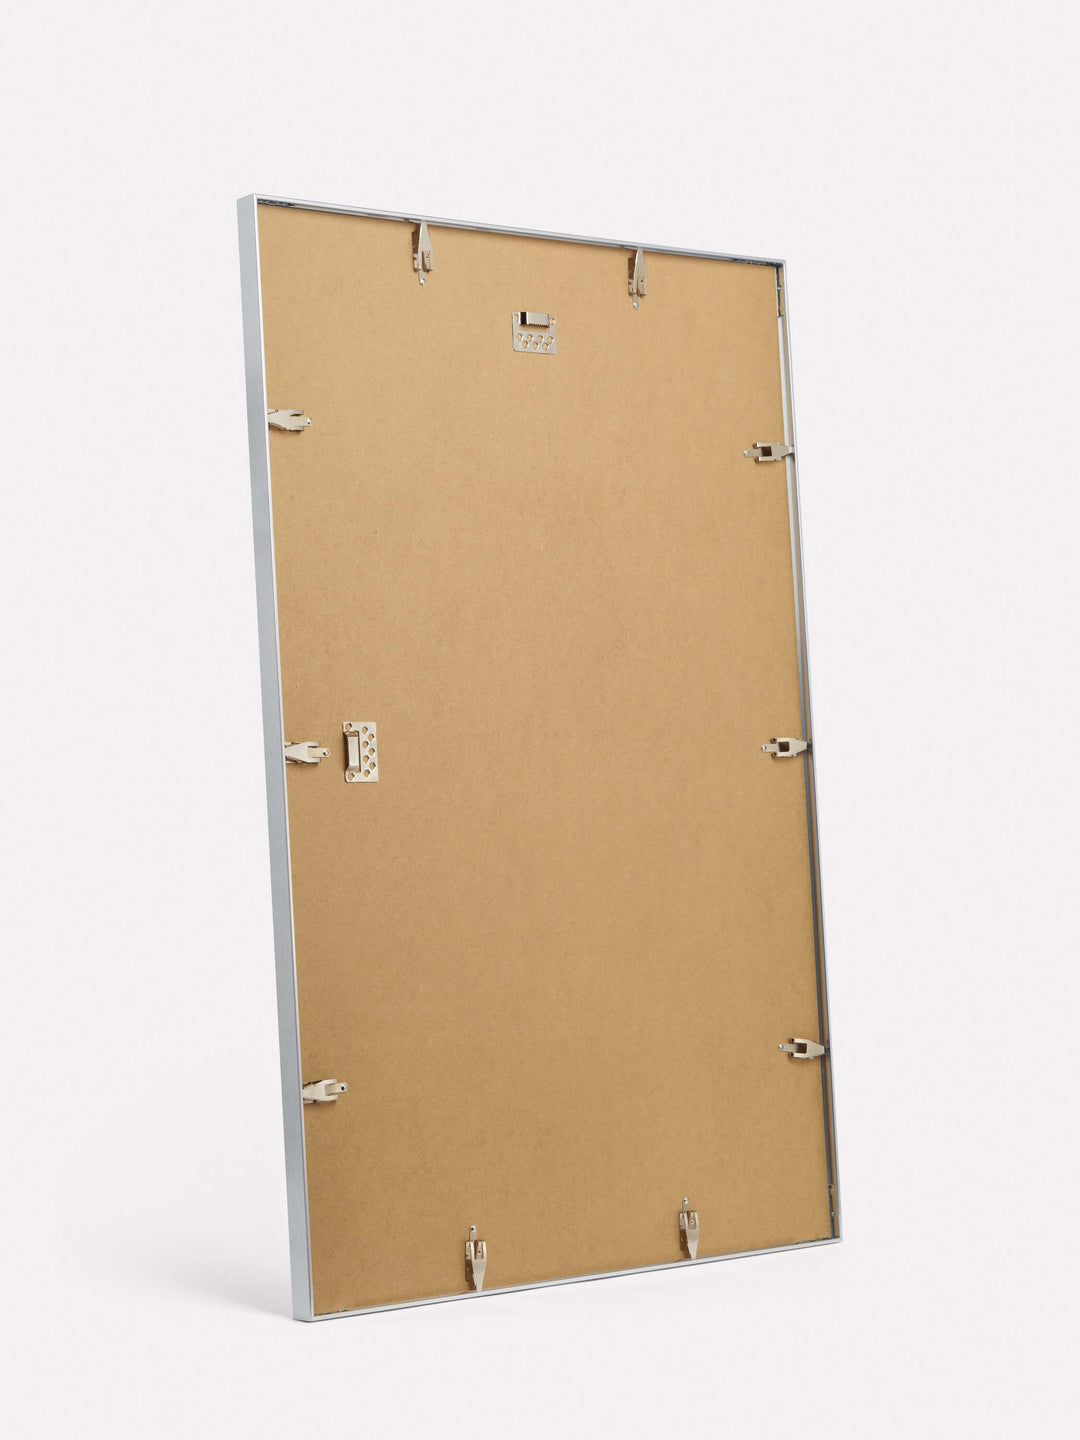 24x36-inch Thin Frame, Silver - Back view